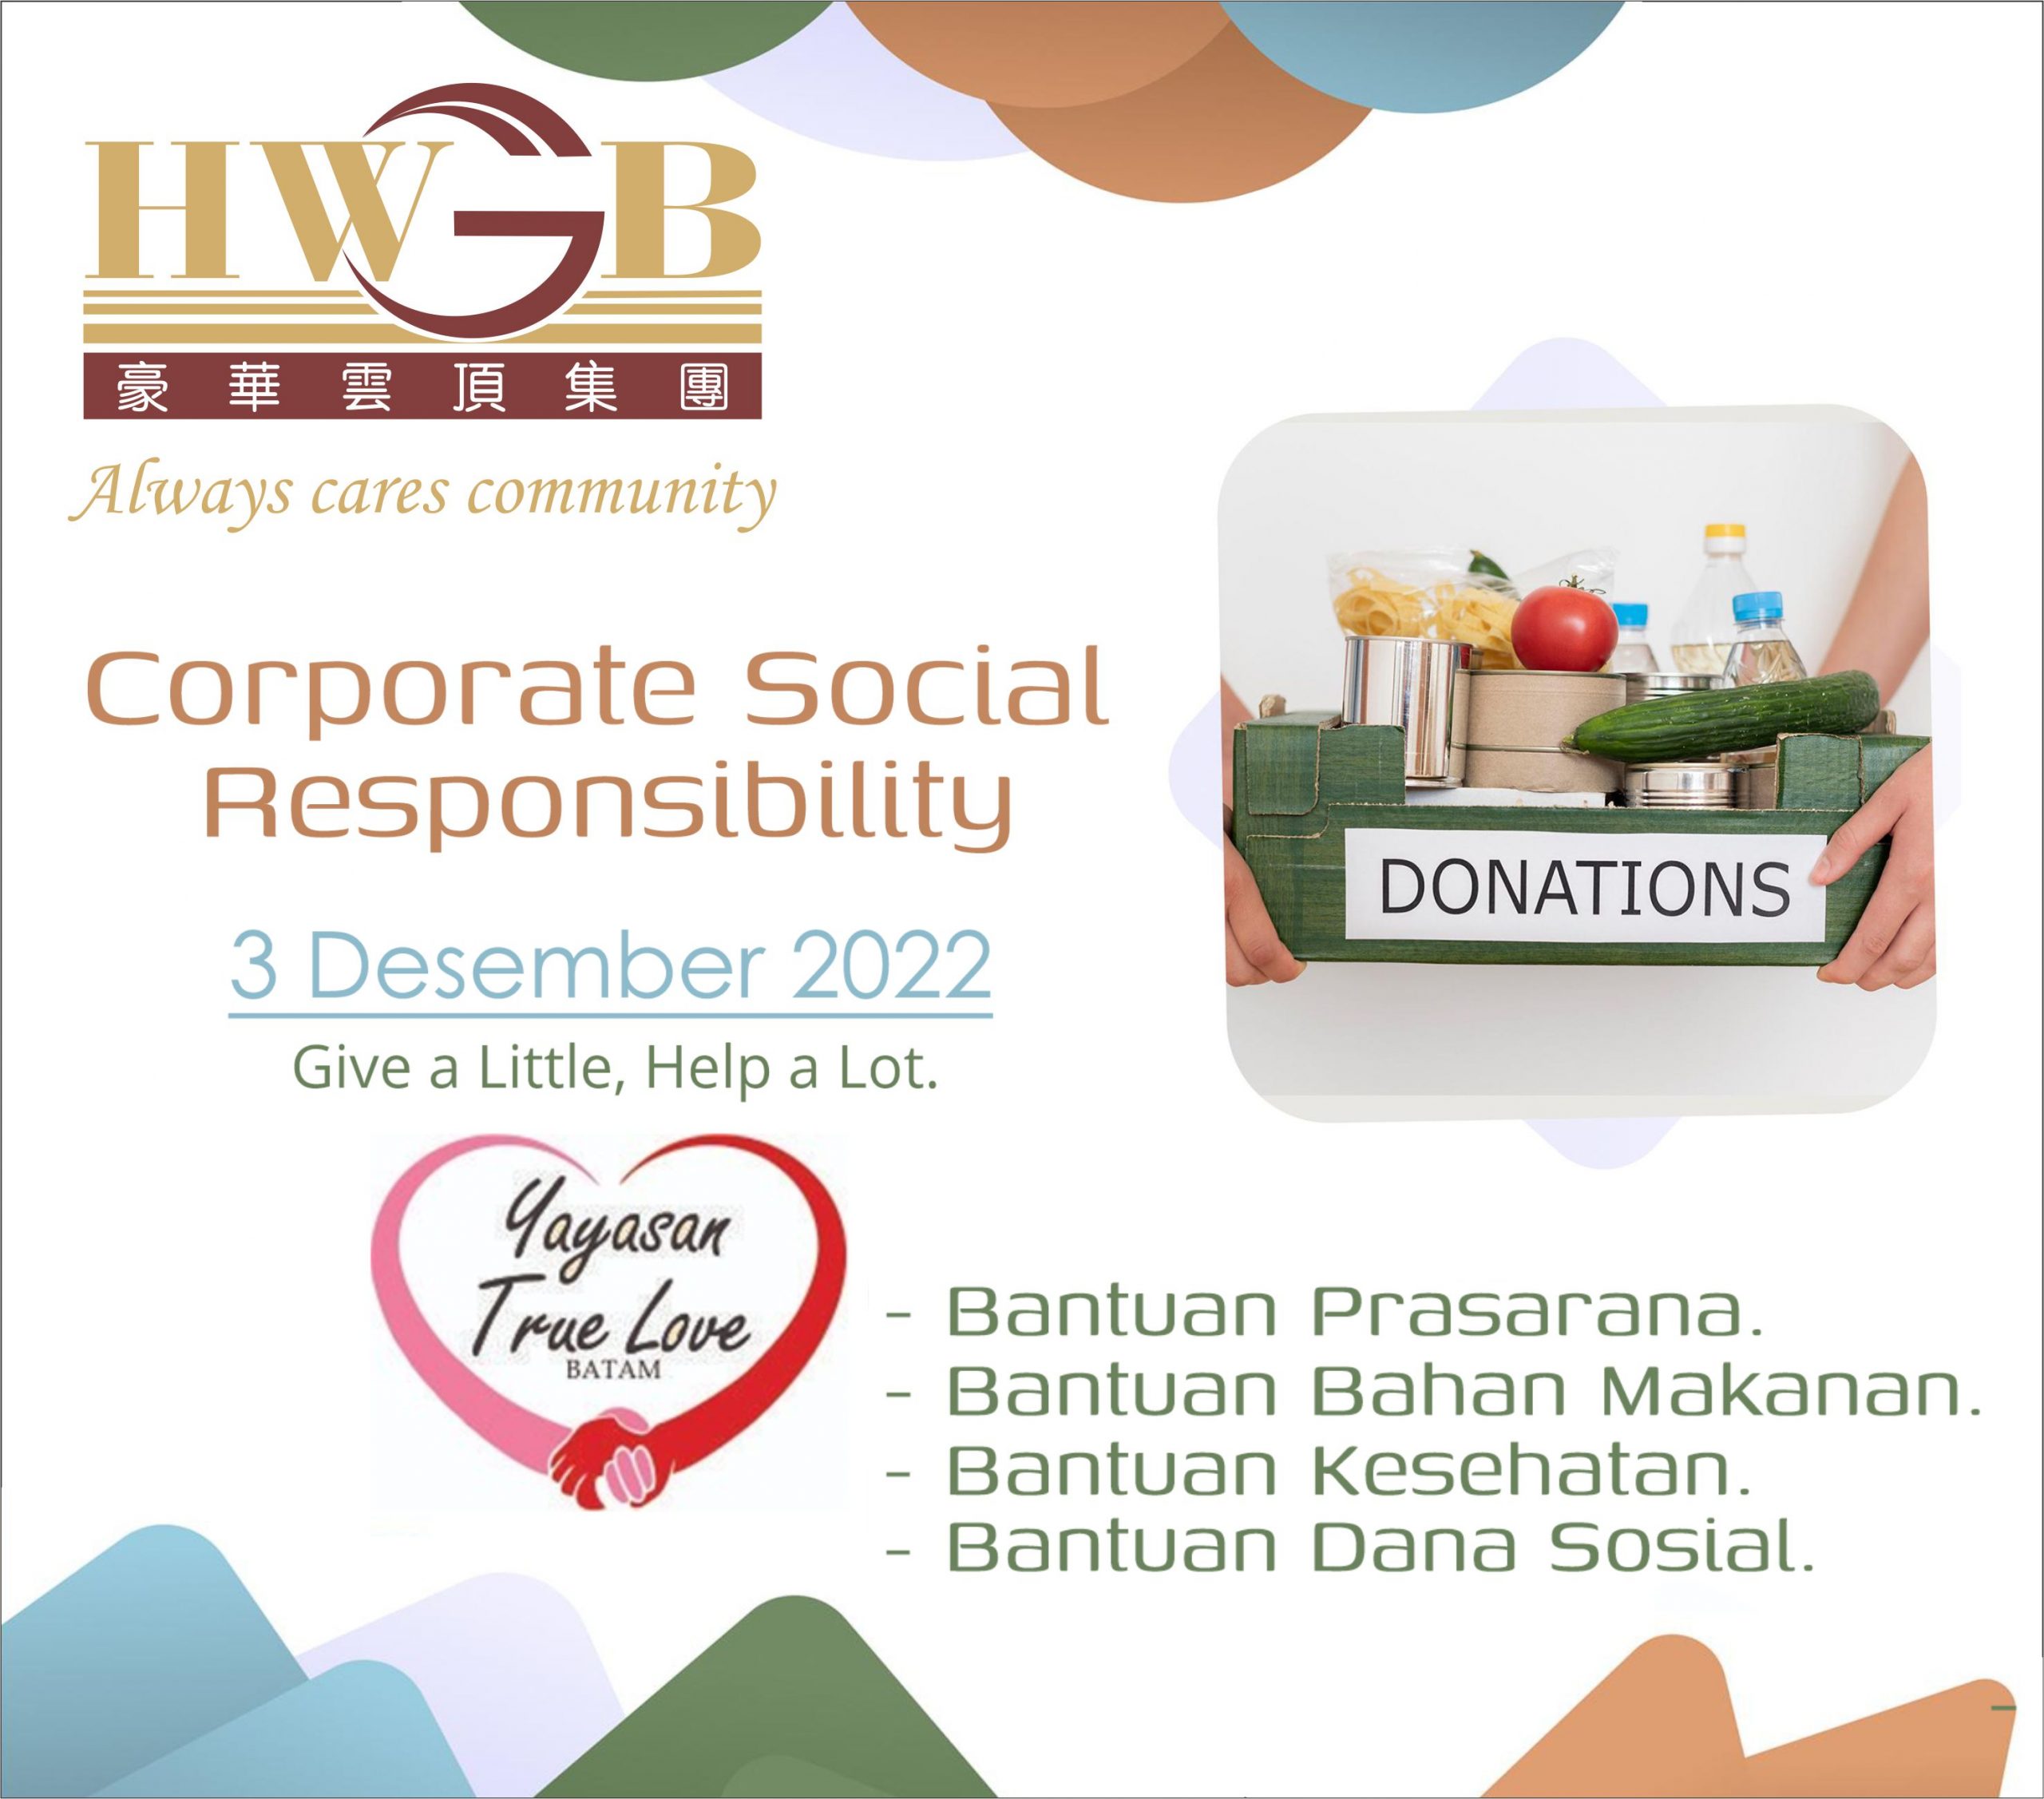 HW-GENTING GOES TO NURSING HOME, Give a Little, Help a Lot